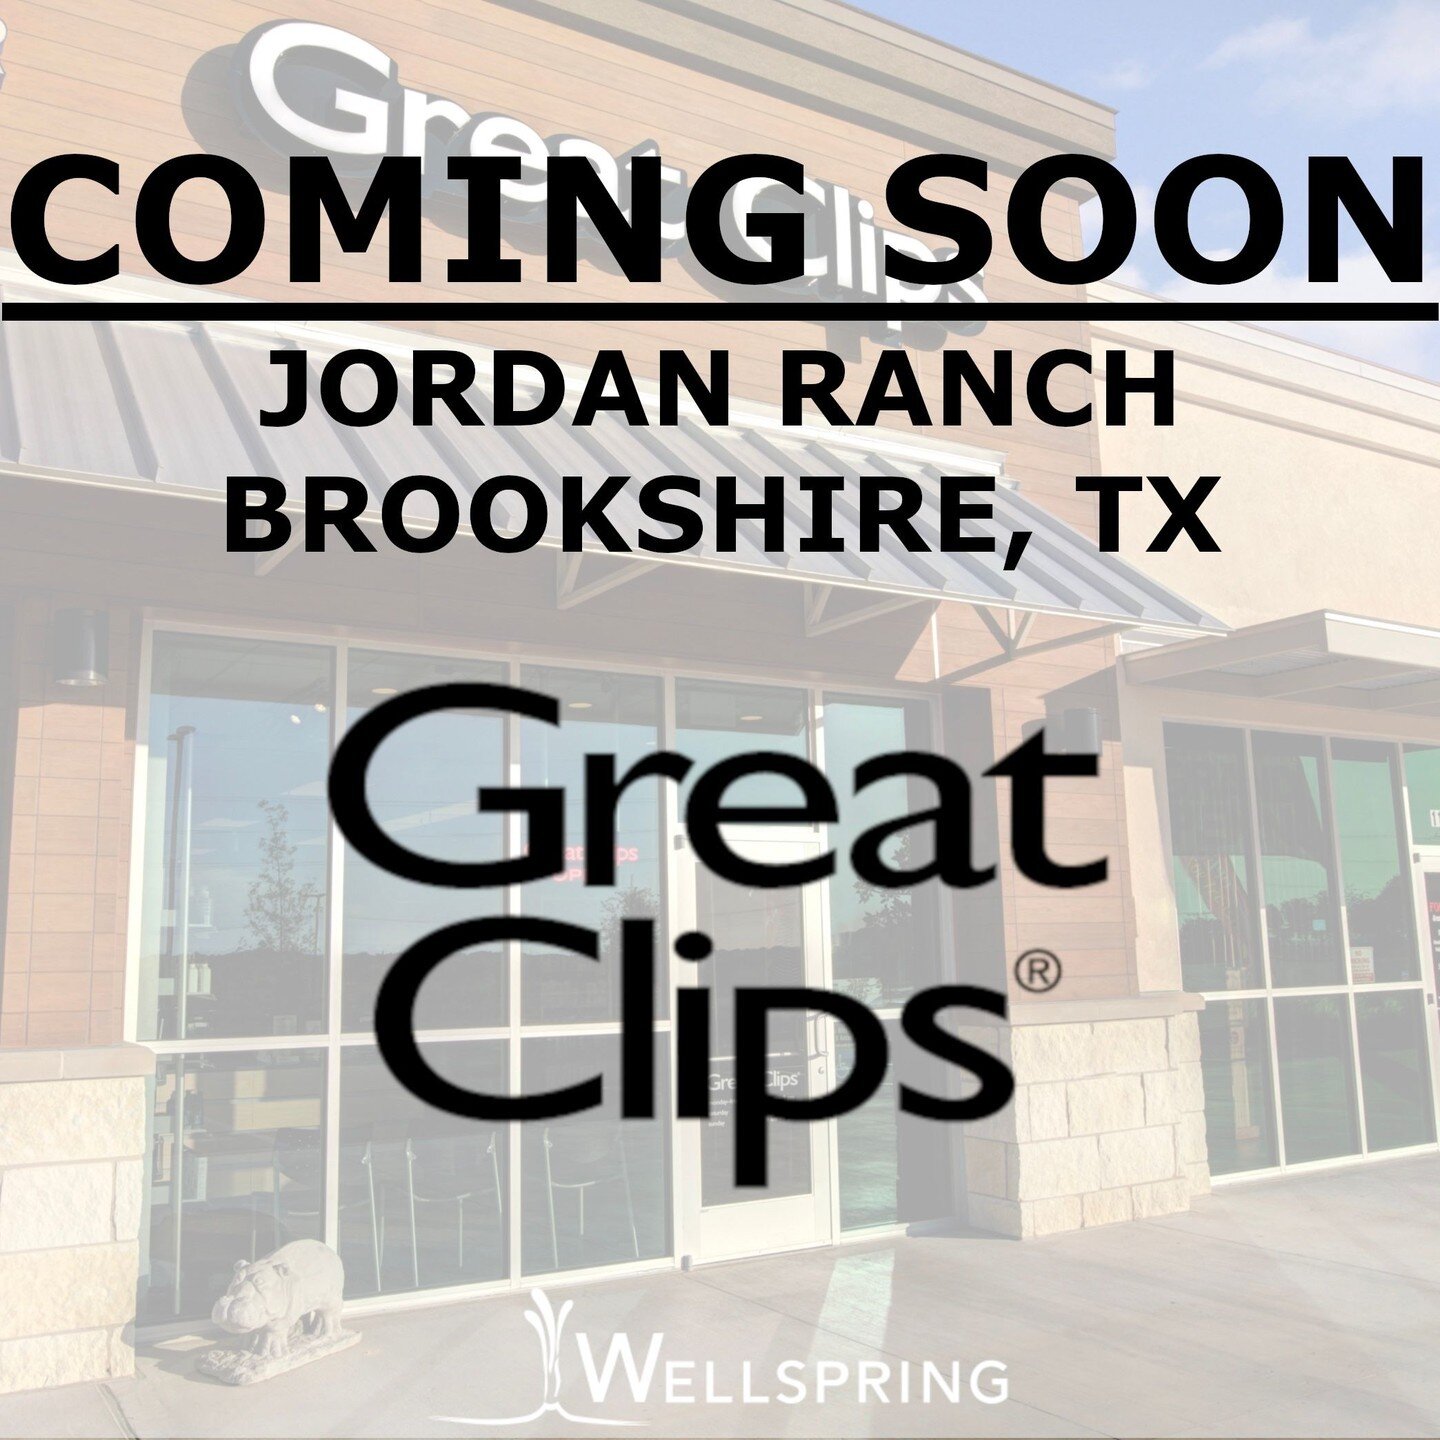 Customers out west need haircuts, too! Wellspring Commercial Real Estate is pleased to announce the signing of a new location for Great Clips in Jordan Ranch!

Jonathan Aron with Hunington Properties represented the Landlord. Marshall C. Bumpus with 